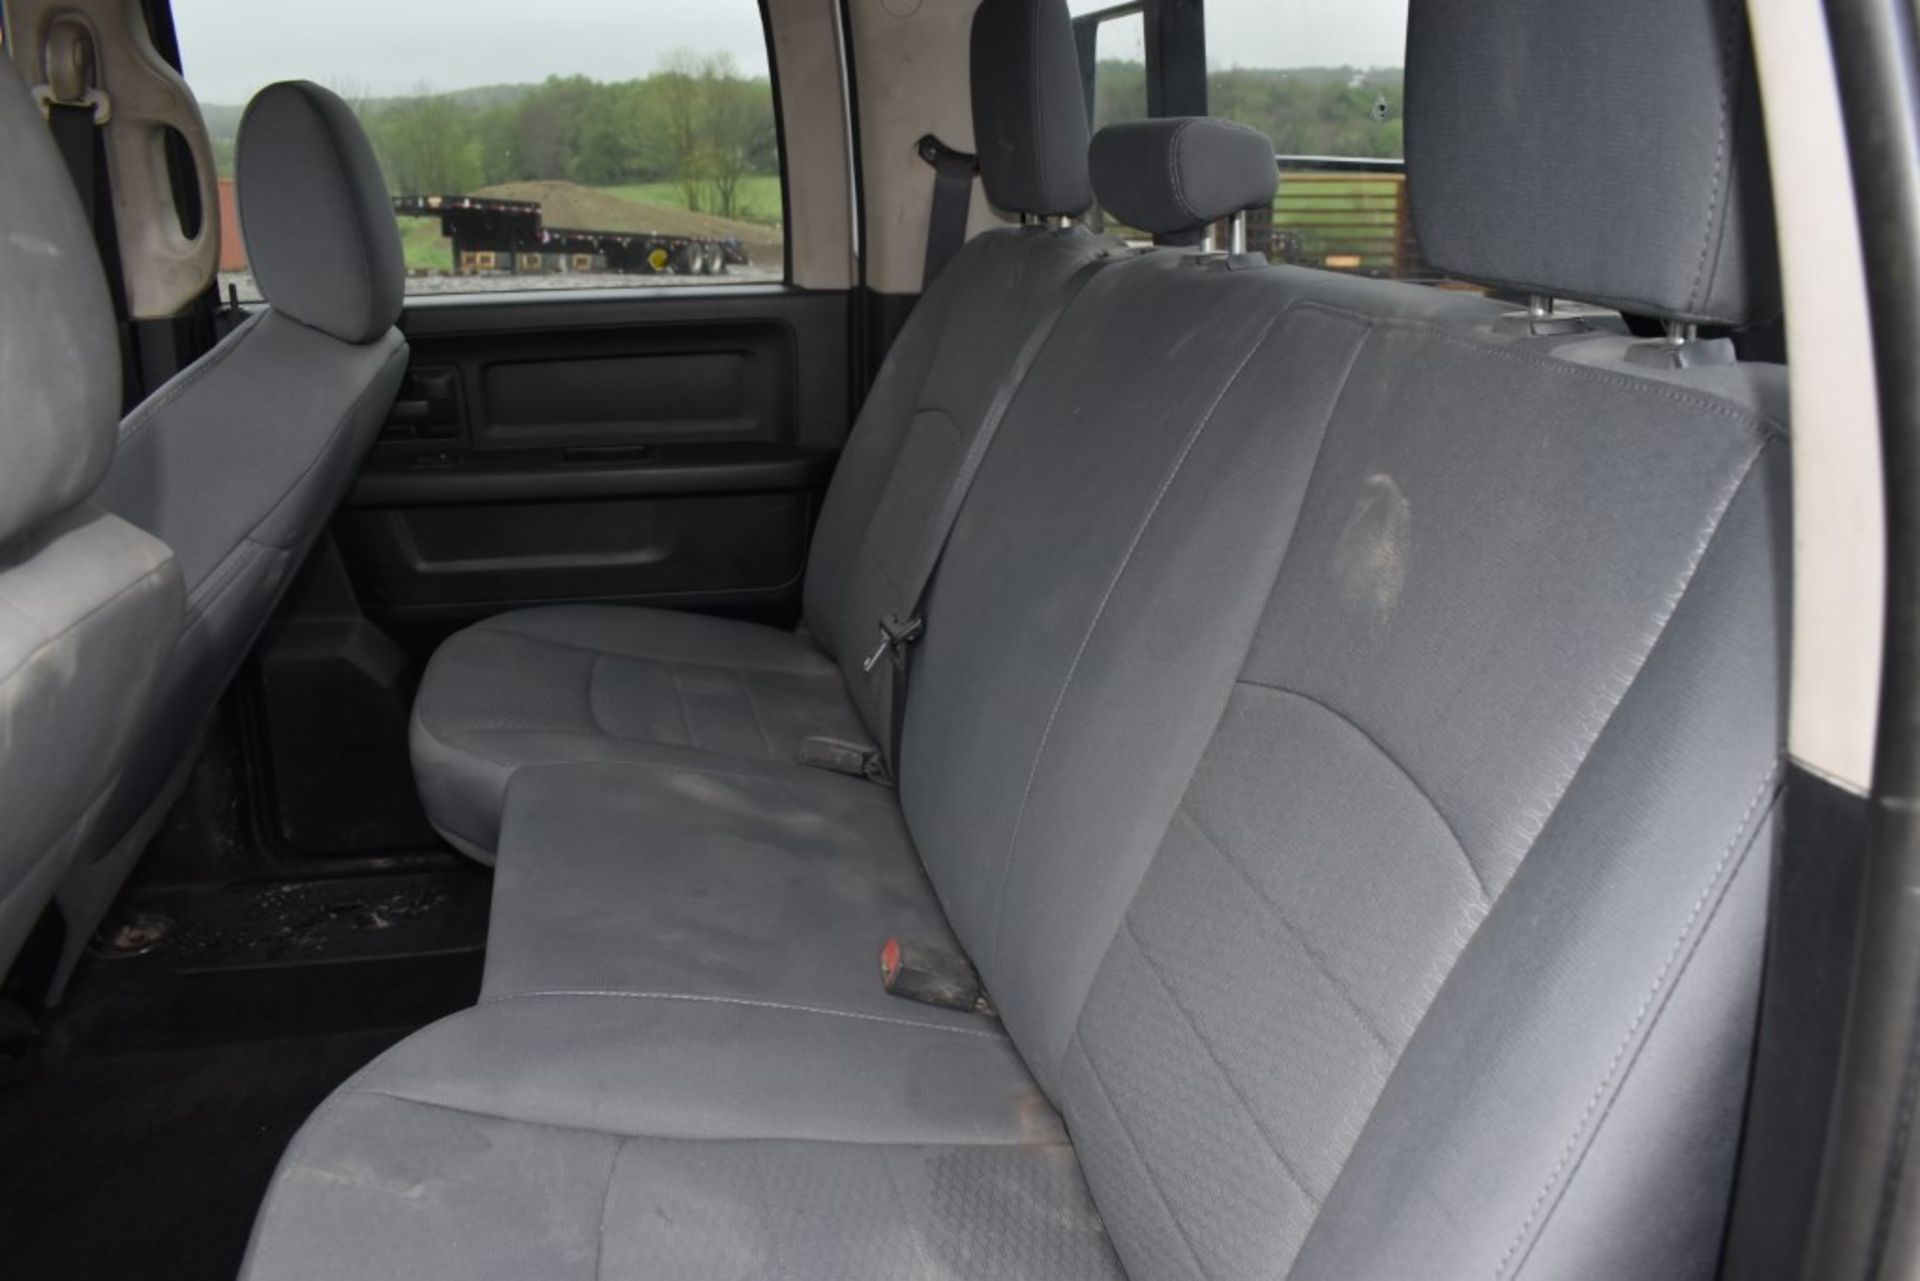 2015 Dodge Ram 2500 Truck With Title, 181238 Miles, Runs and Drives, Hemi 5.7 Gas Engine, Automatic, - Image 17 of 23